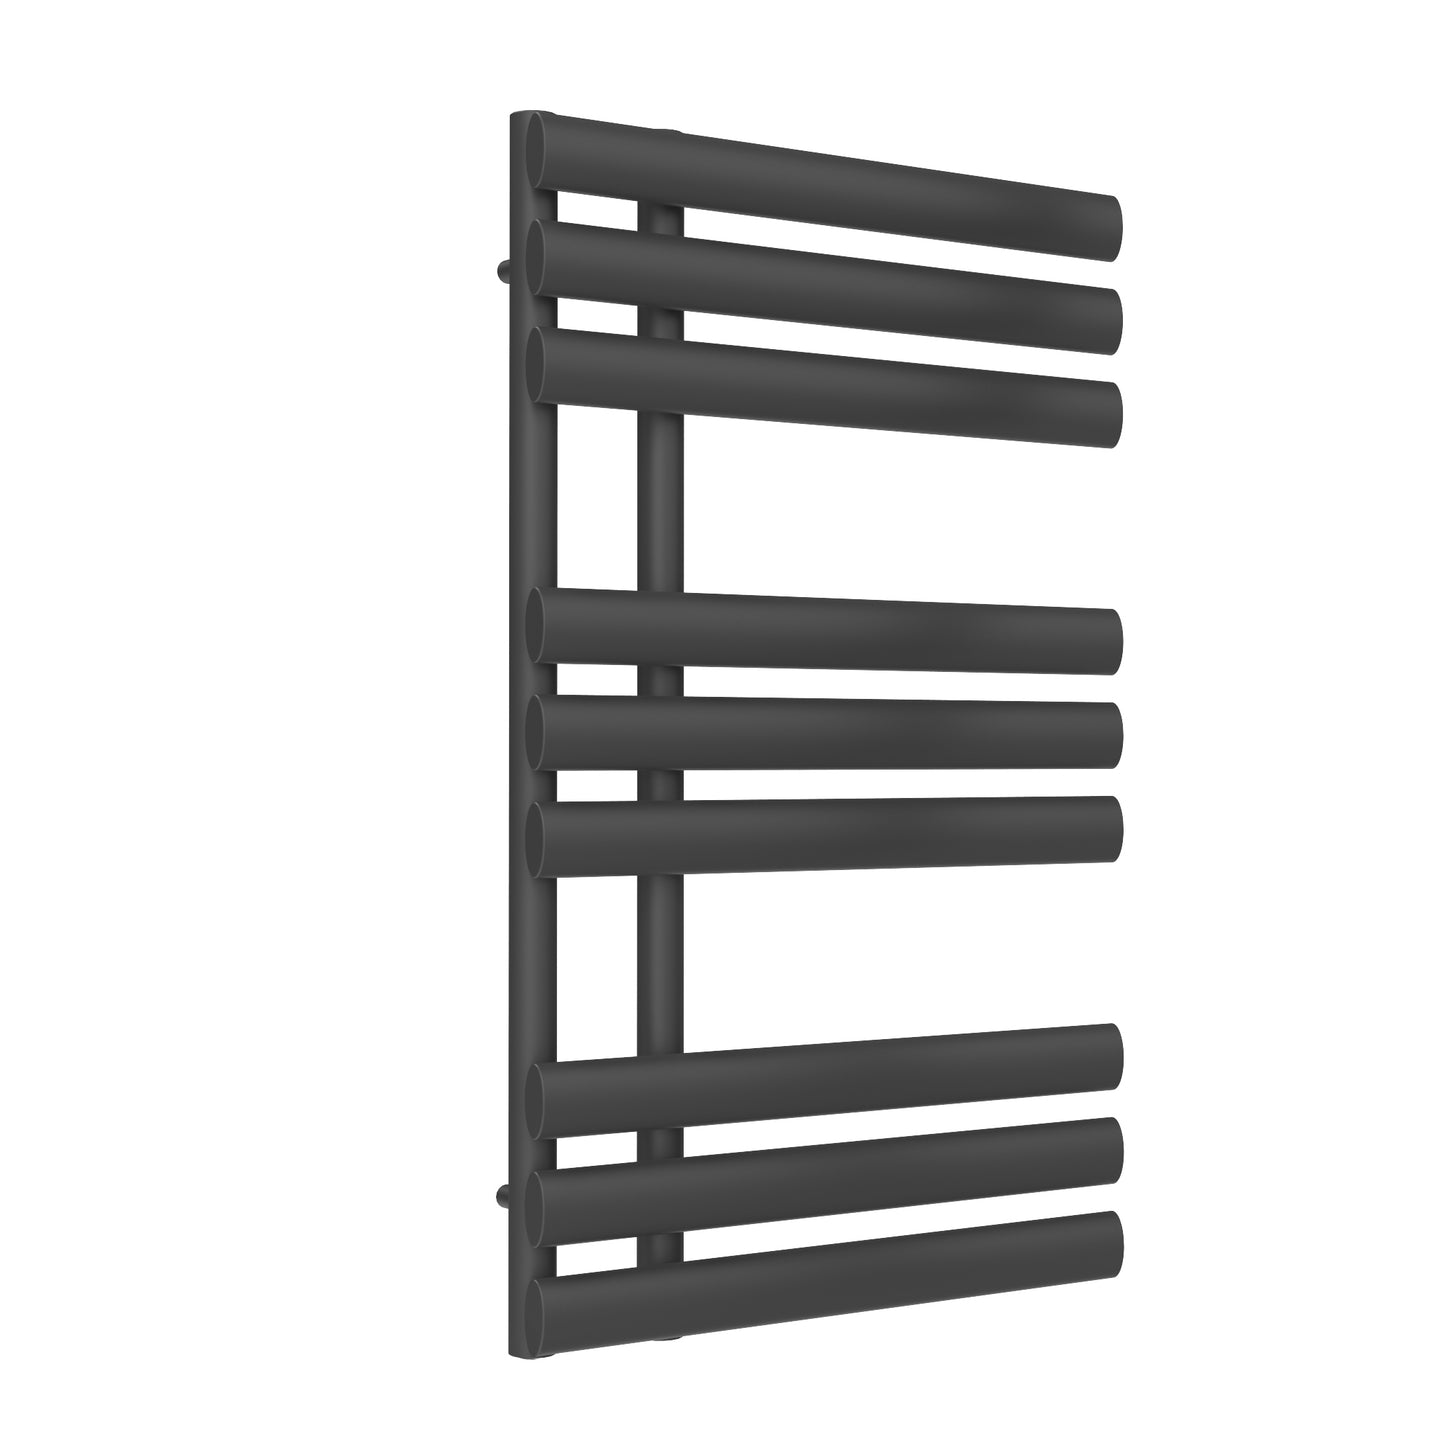 Chisa Heated Towel Rail - Various Sizes - Anthracite